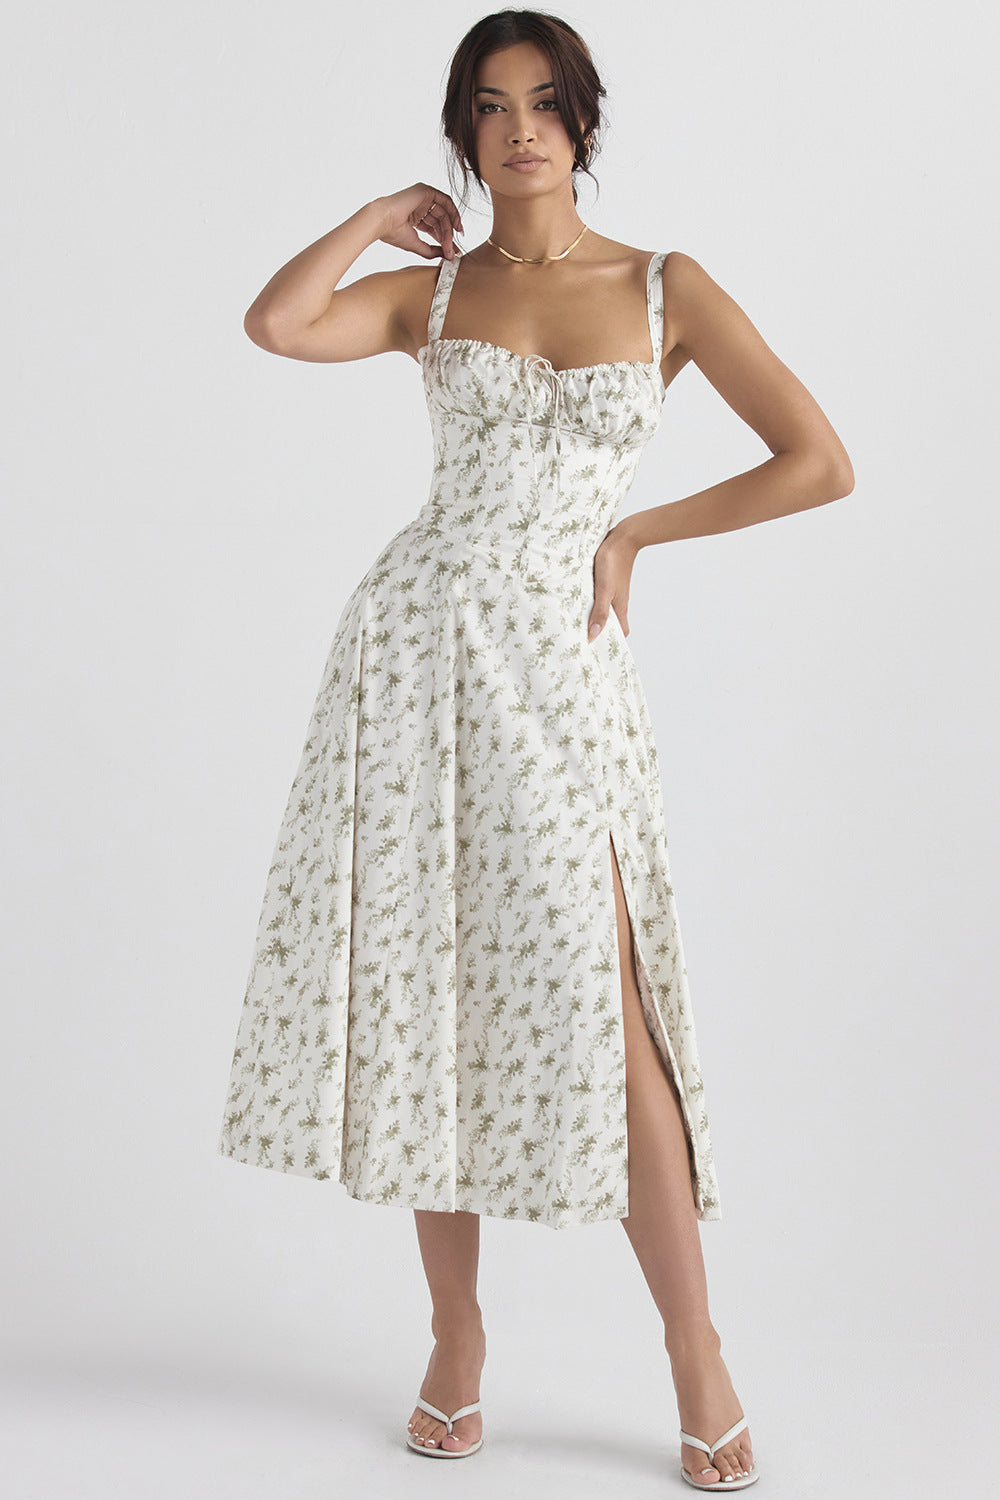 Dress Frenchy Floral